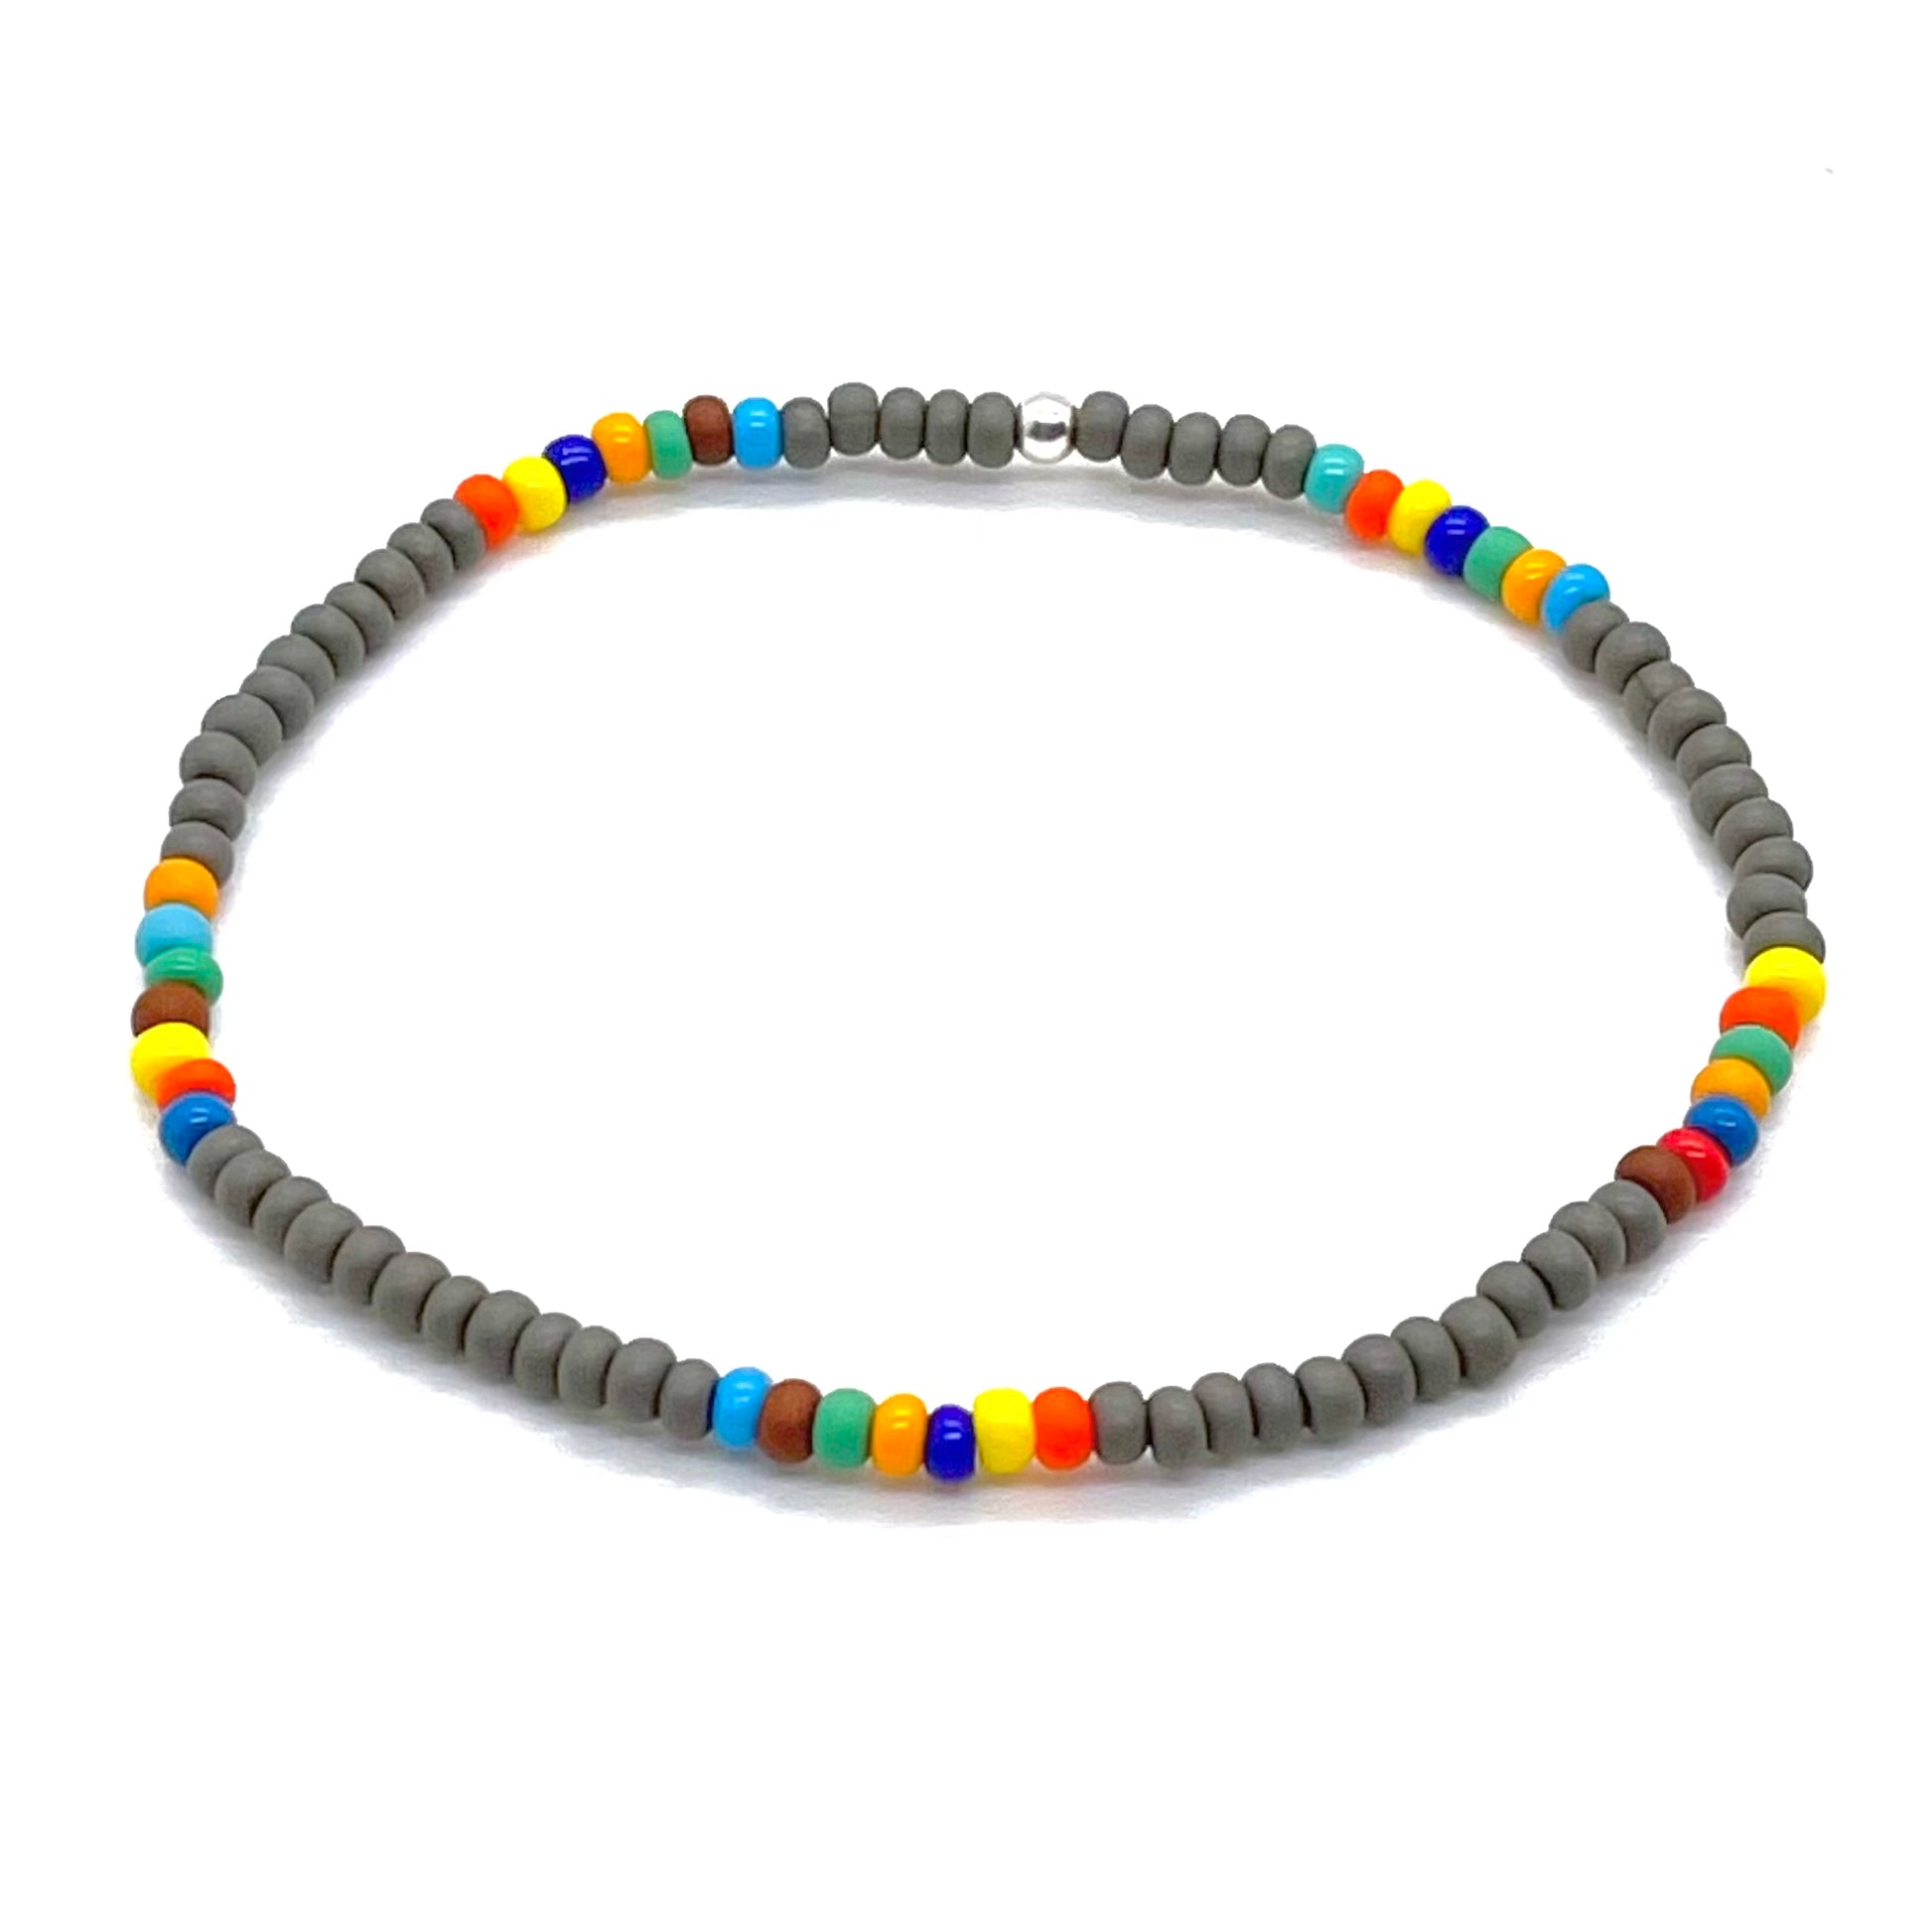 Men's thin bracelet with gray taupe beads mixed with colorful seed beads on stretch cord. Waterproof.